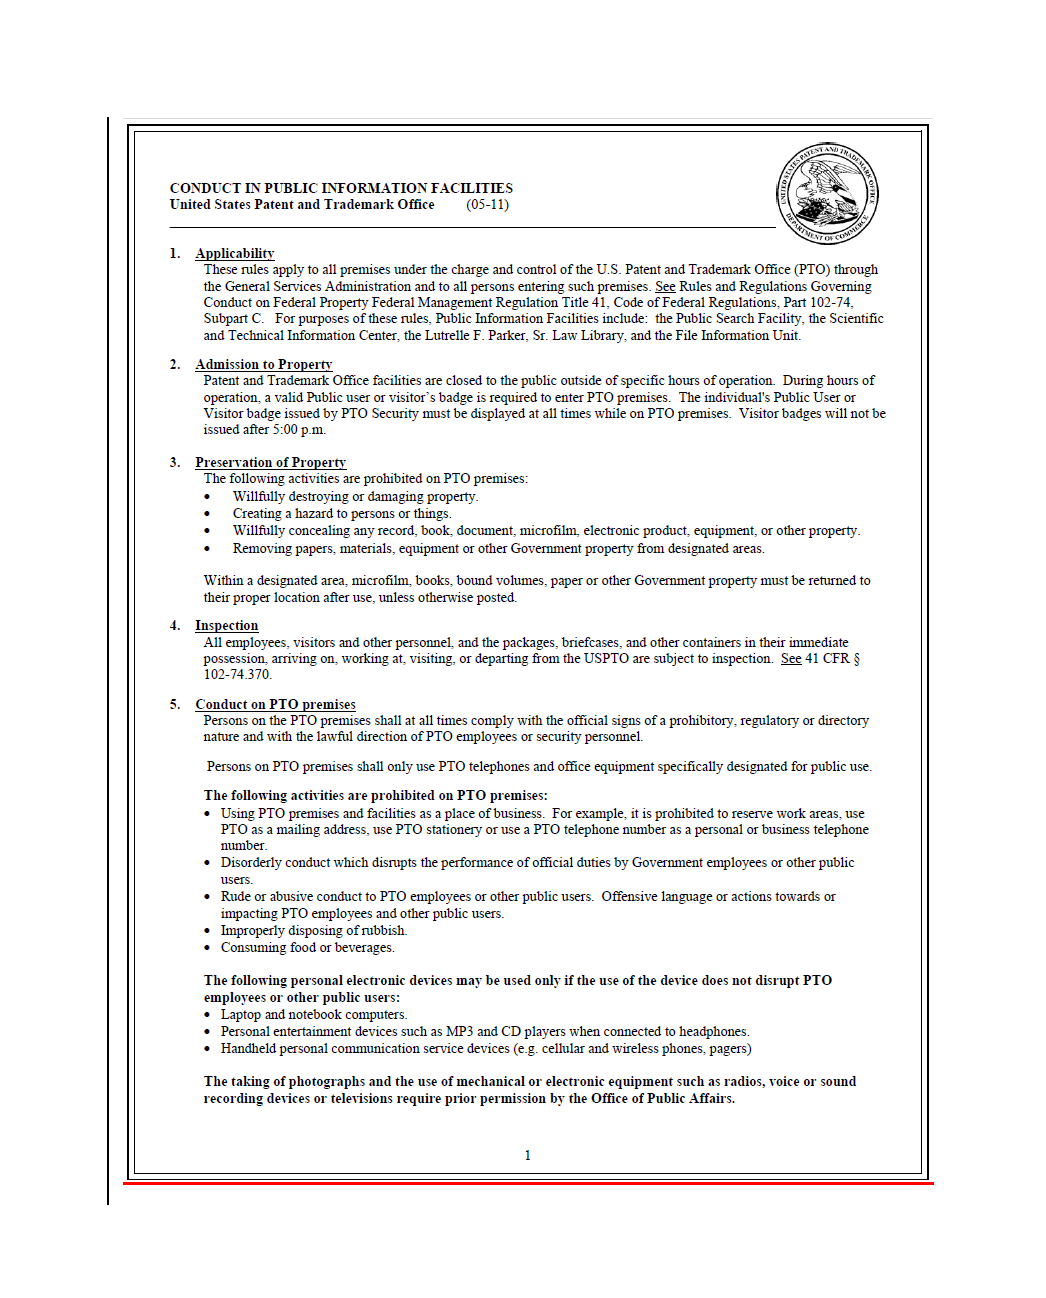 Conduct in Public Information Facilities page 1